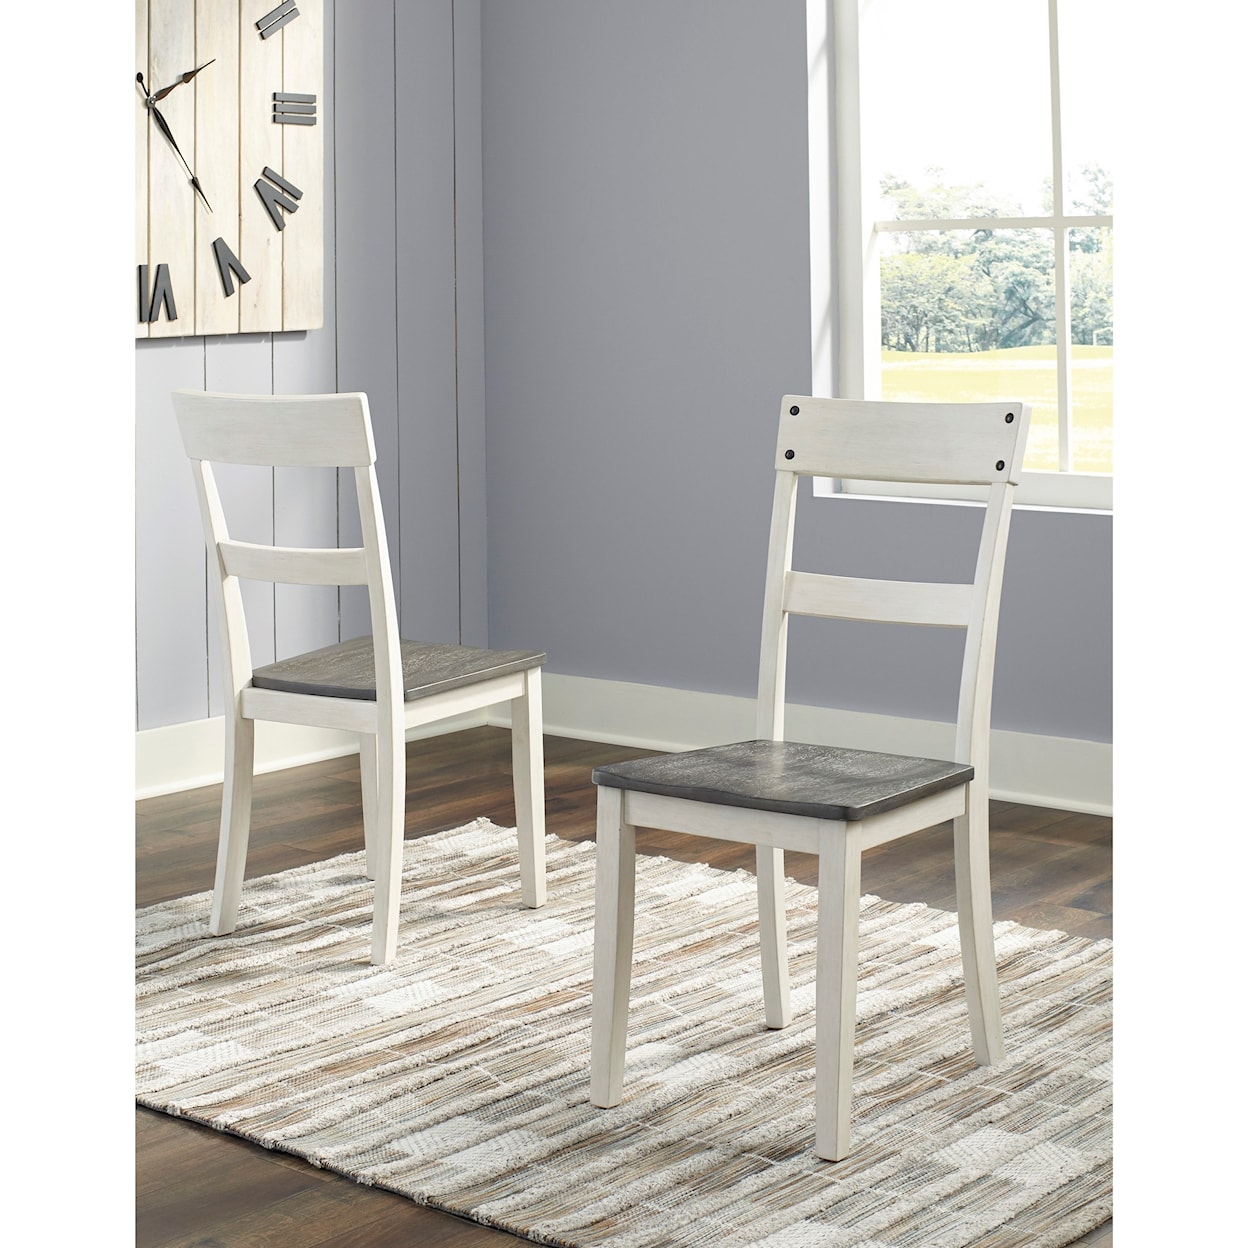 Signature Design by Ashley Nelling Dining Room Side Chair